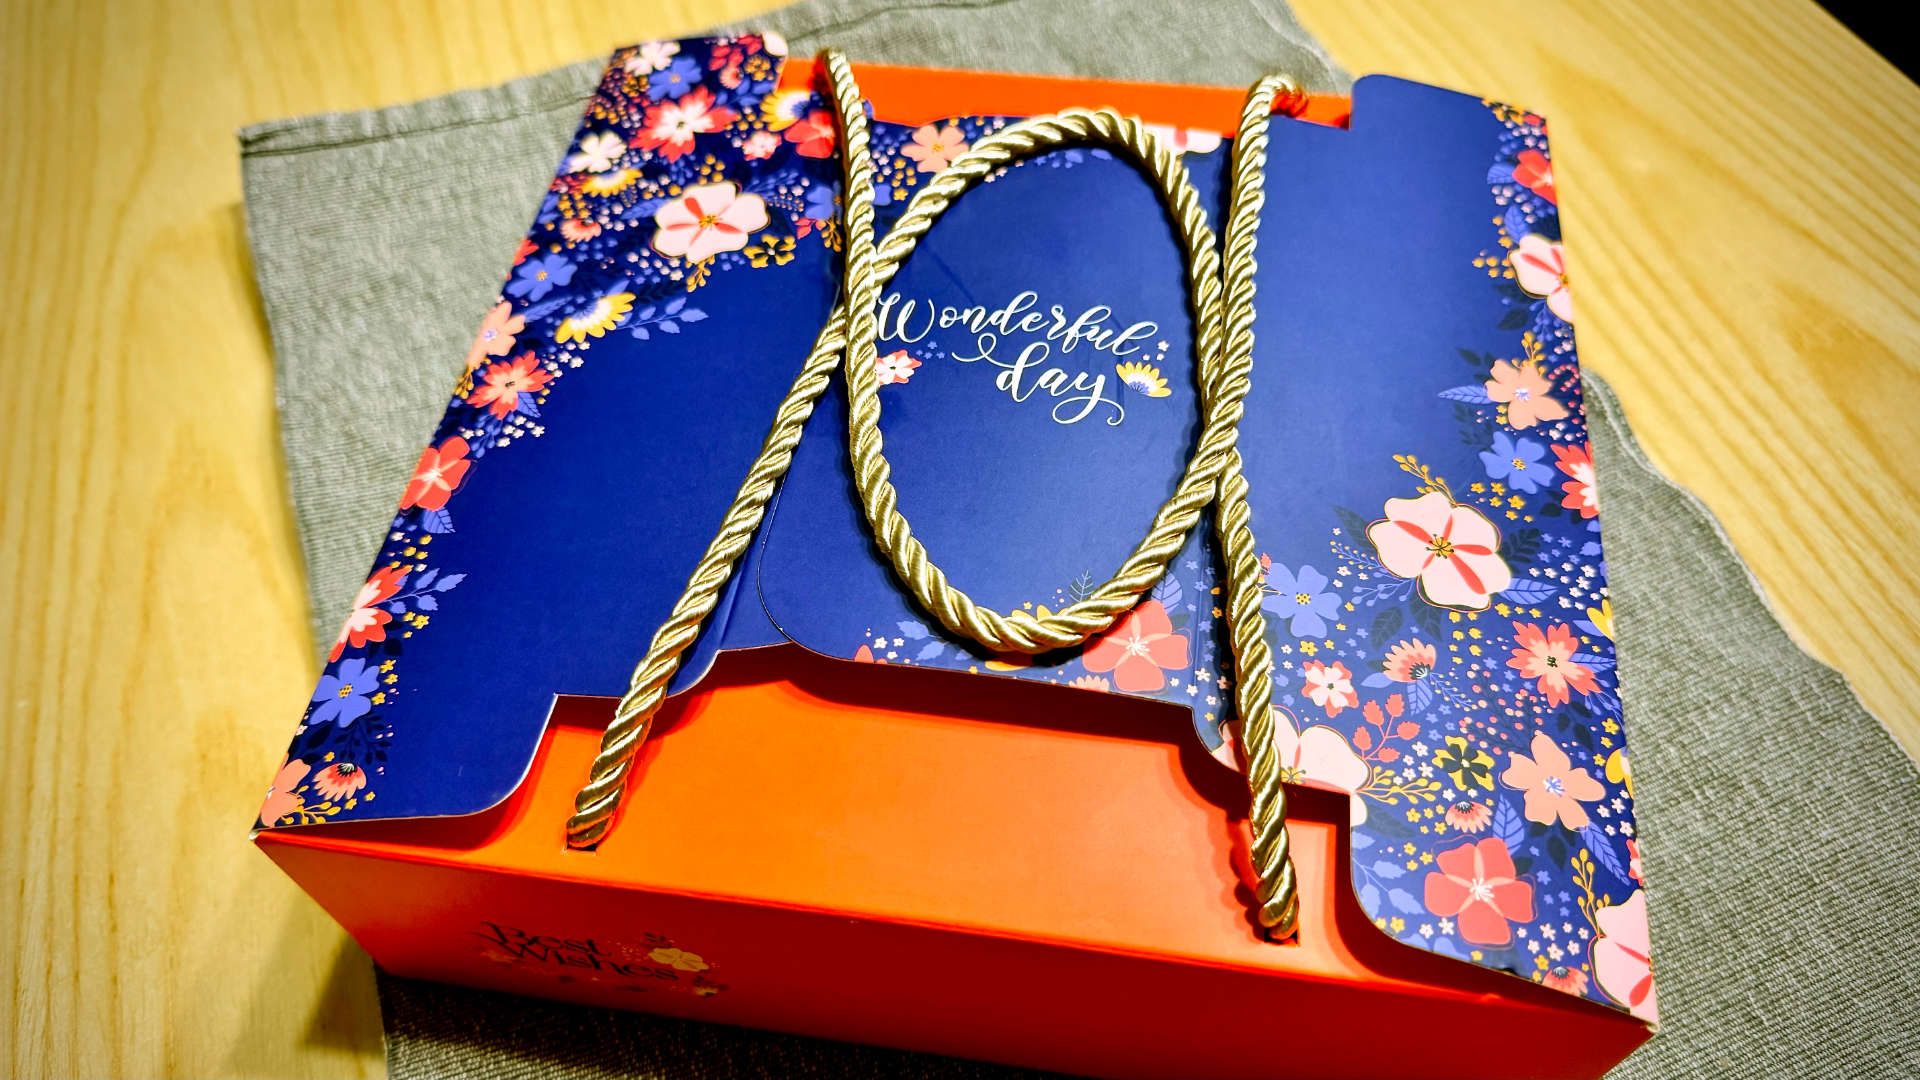 A colorful cardboard box with golden-cord handles. The box is printed with the words ‘wonderful day’ and ‘best wishes’ in cursive script.